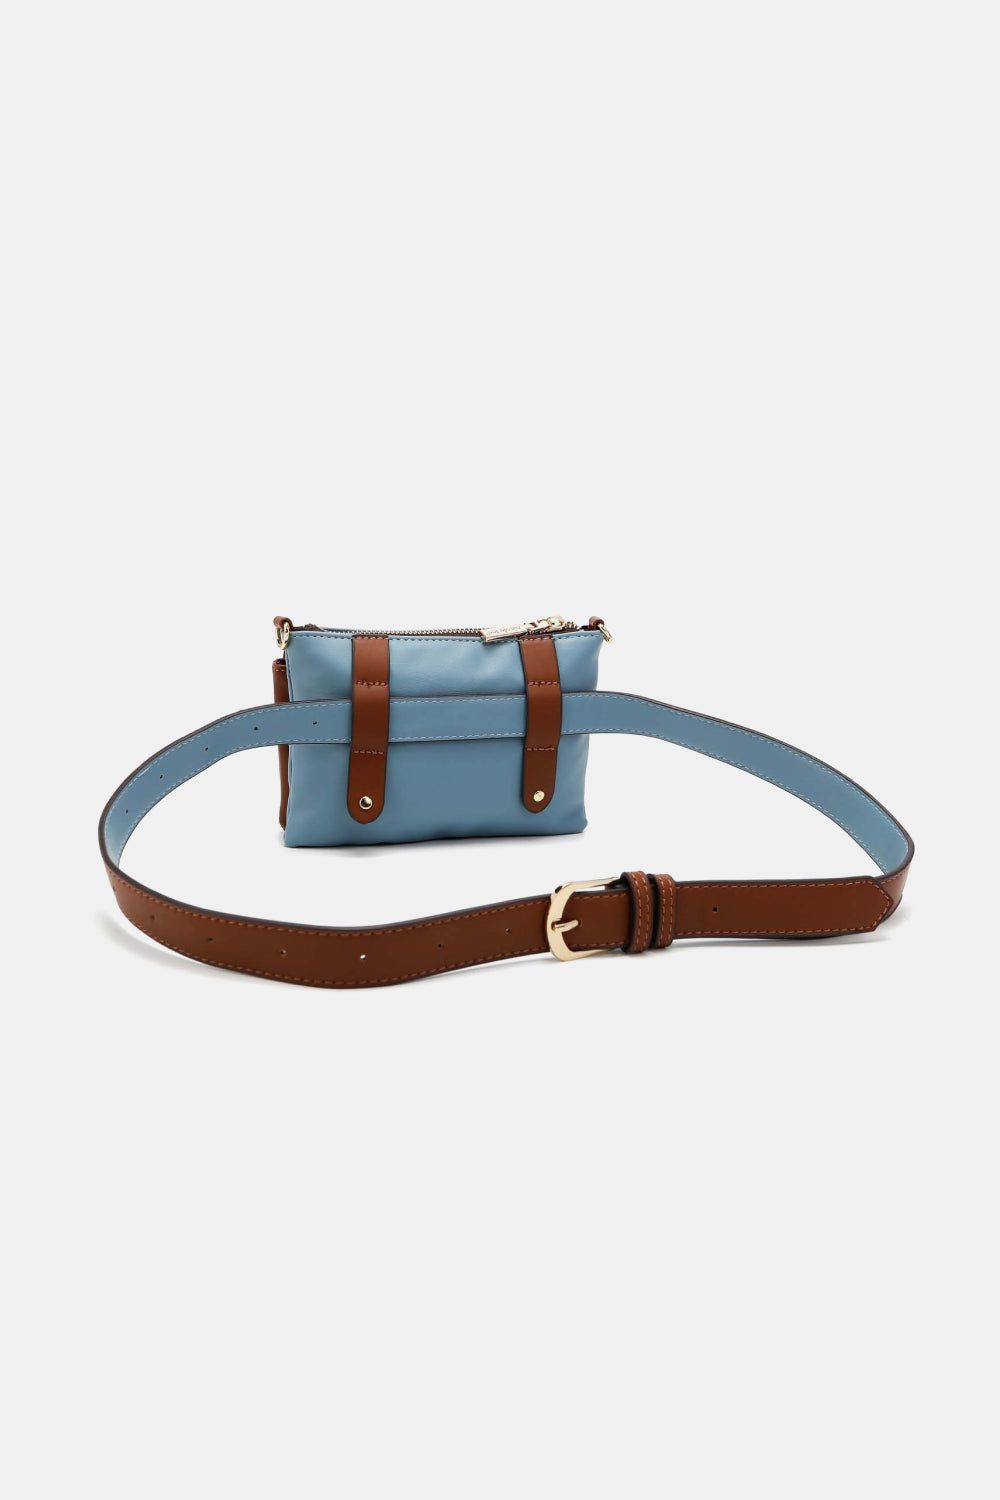 Nicole Lee USA Vegan Leather Small Fanny Pack